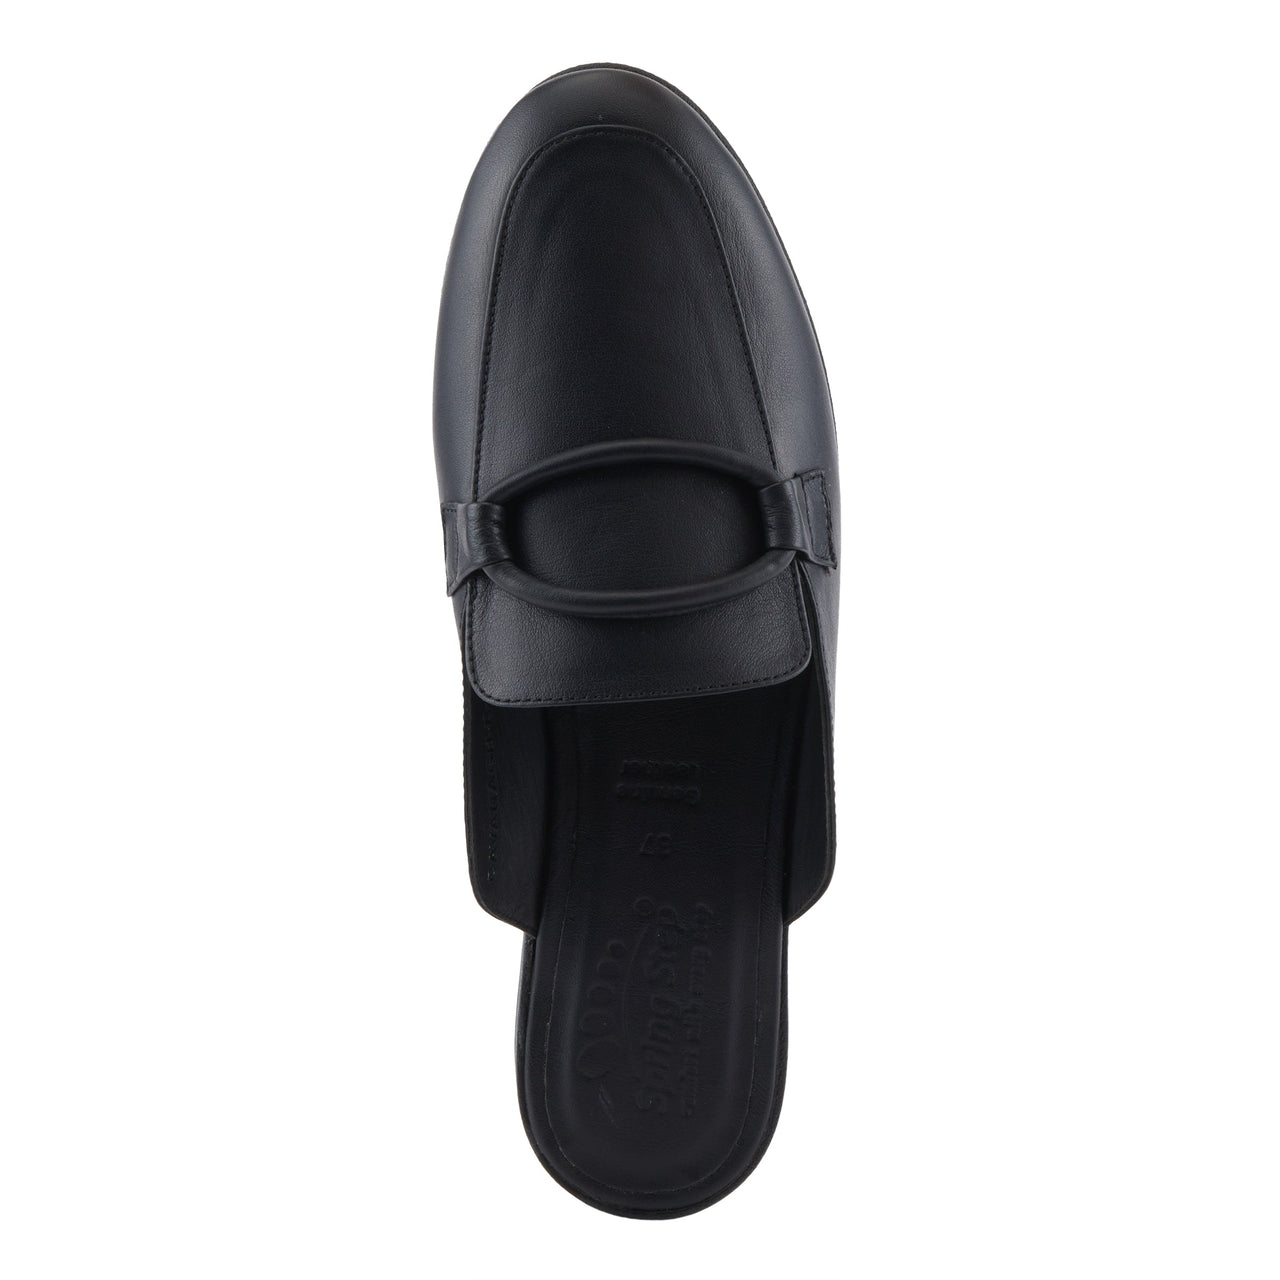 Black leather Spring Step Cavanagh Shoes with cushioned insoles and non-slip soles